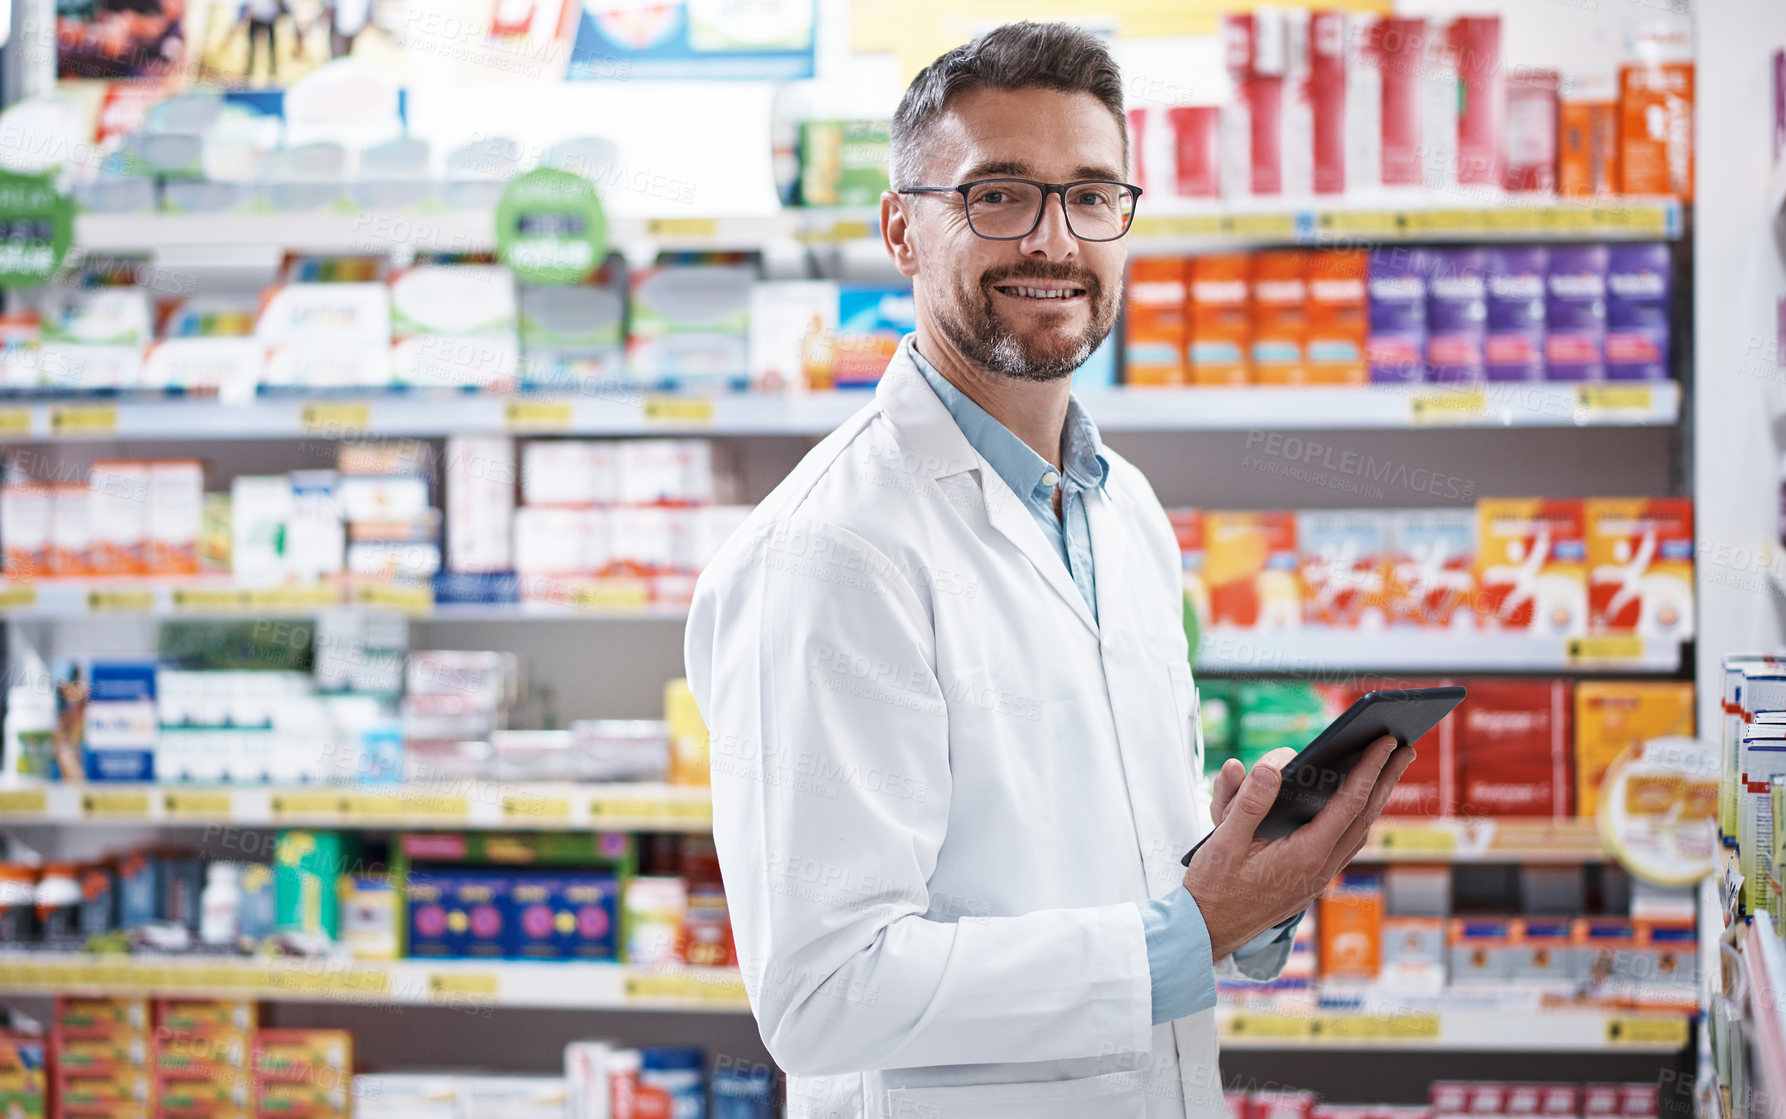 Buy stock photo Portrait of a handsome mature pharmacist using a digital tablet in a pharmacy